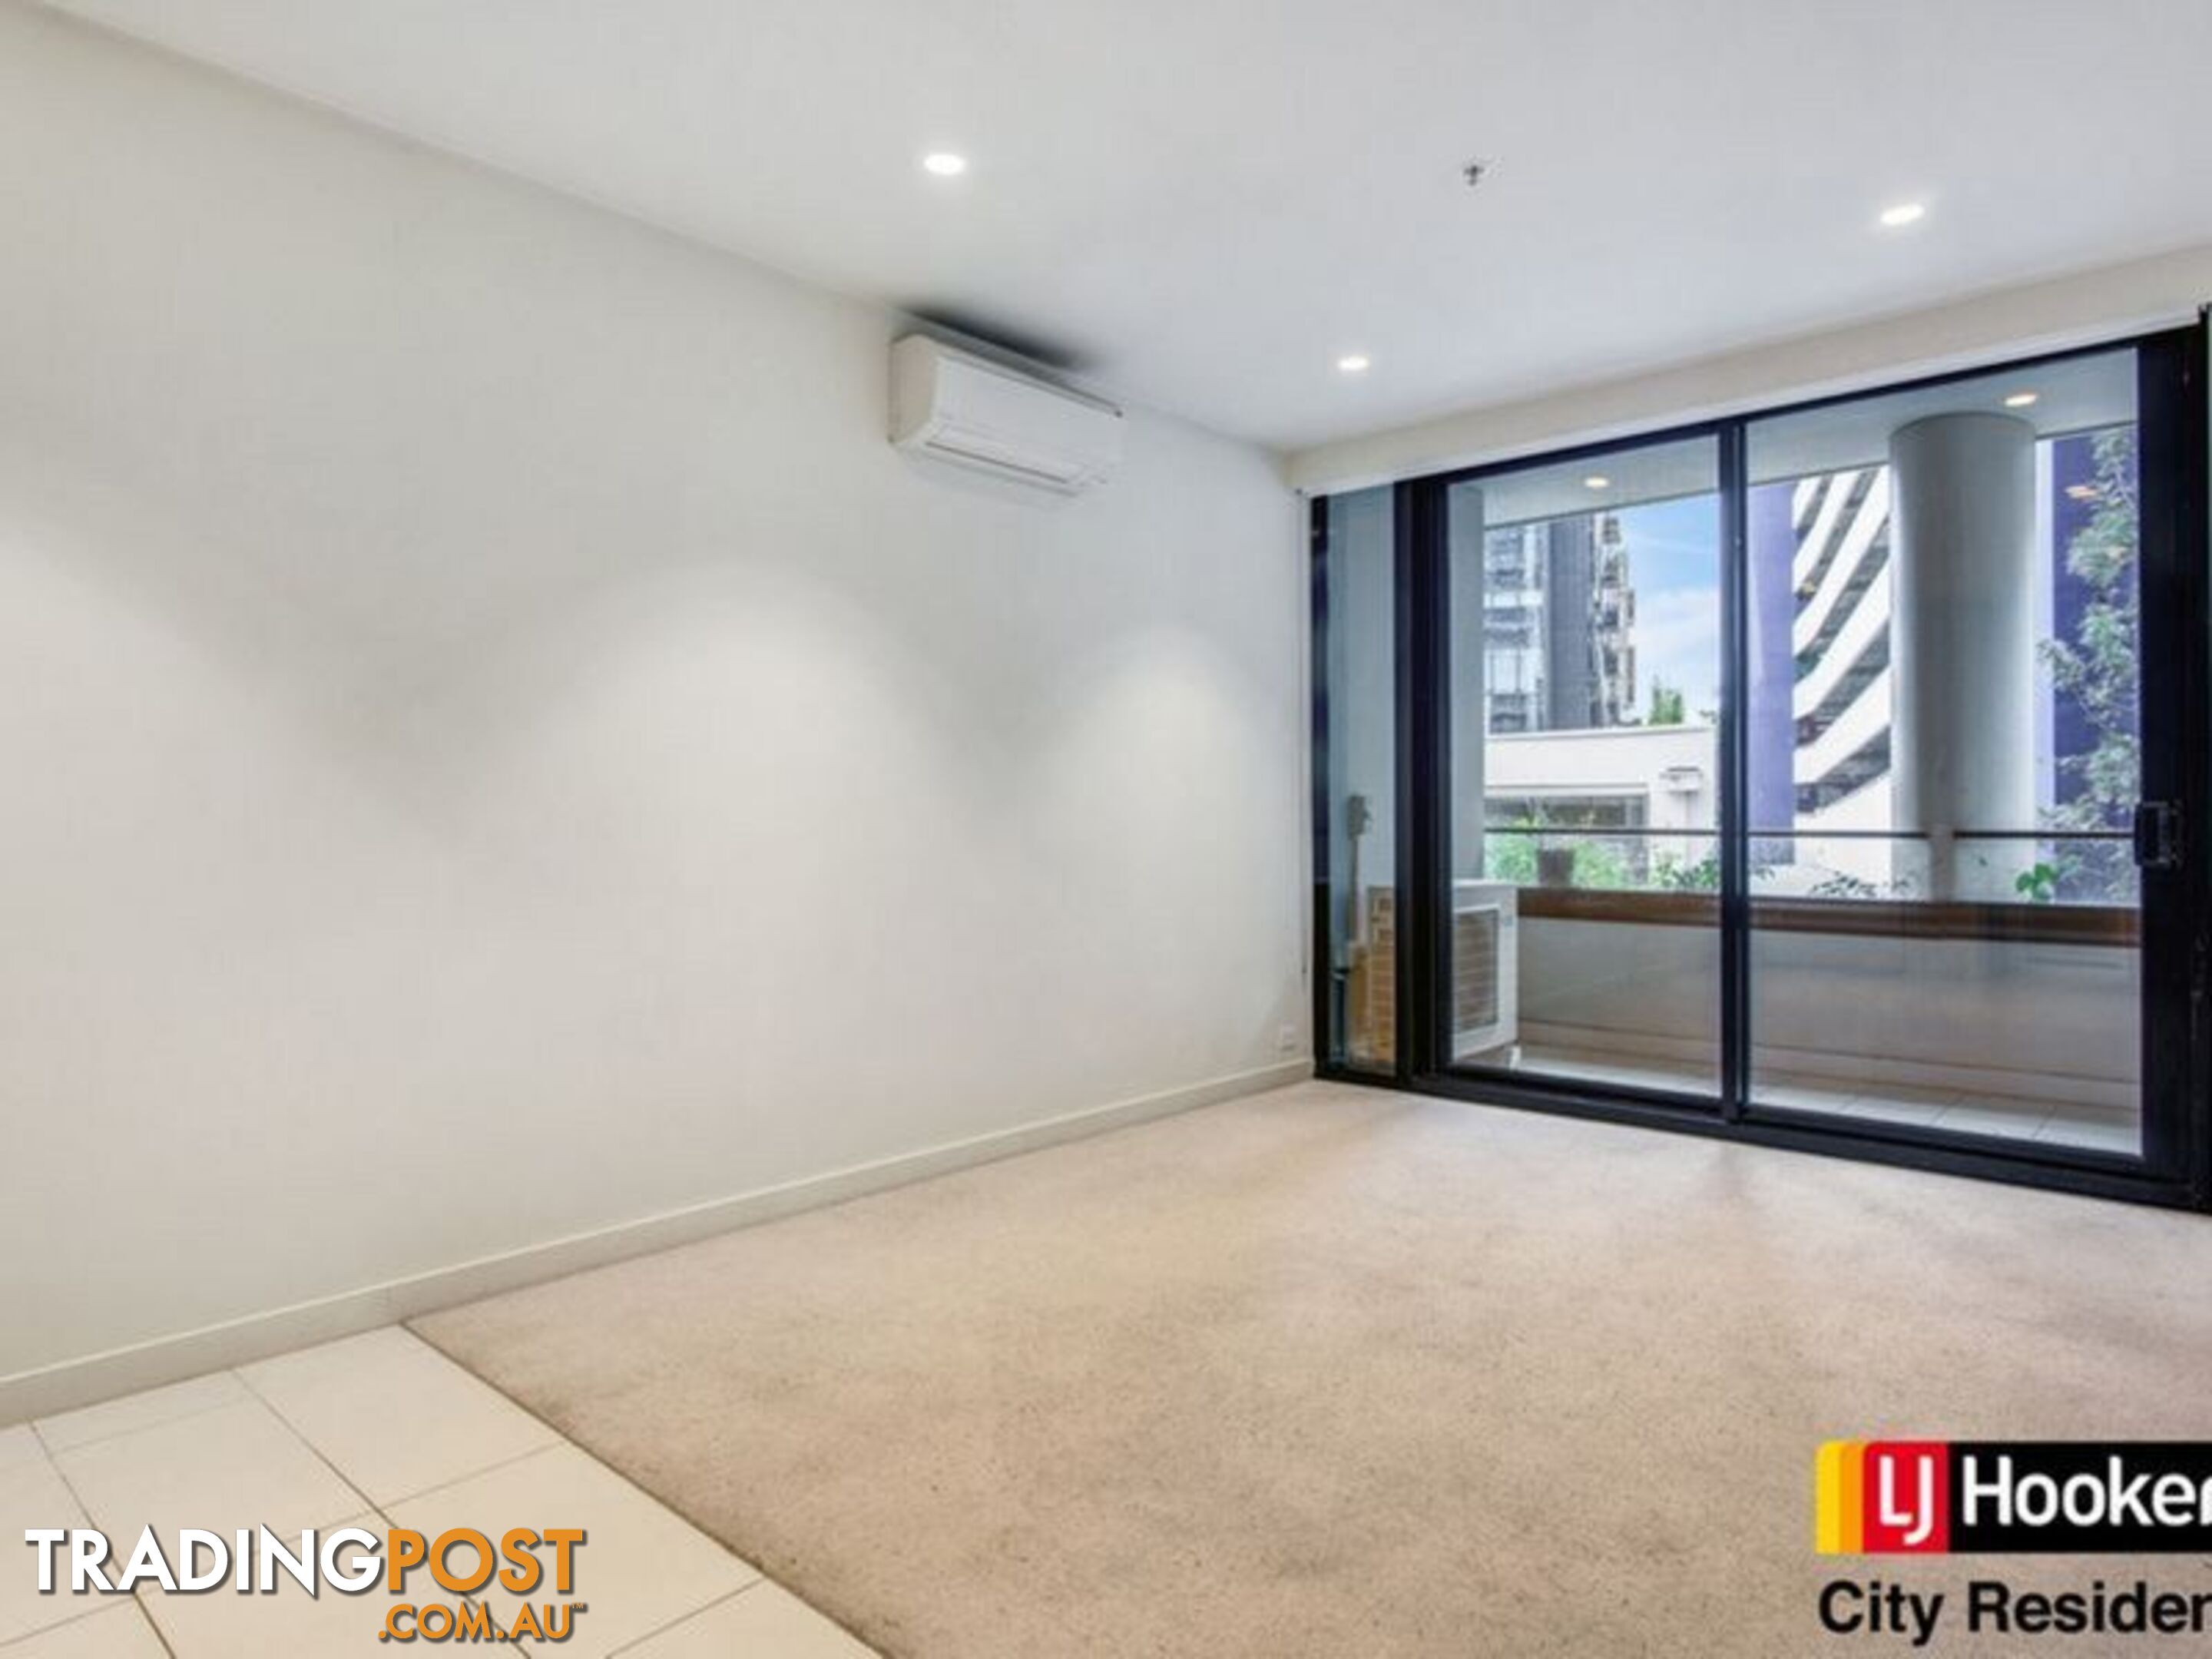 124/4-10 Daly Street SOUTH YARRA VIC 3141